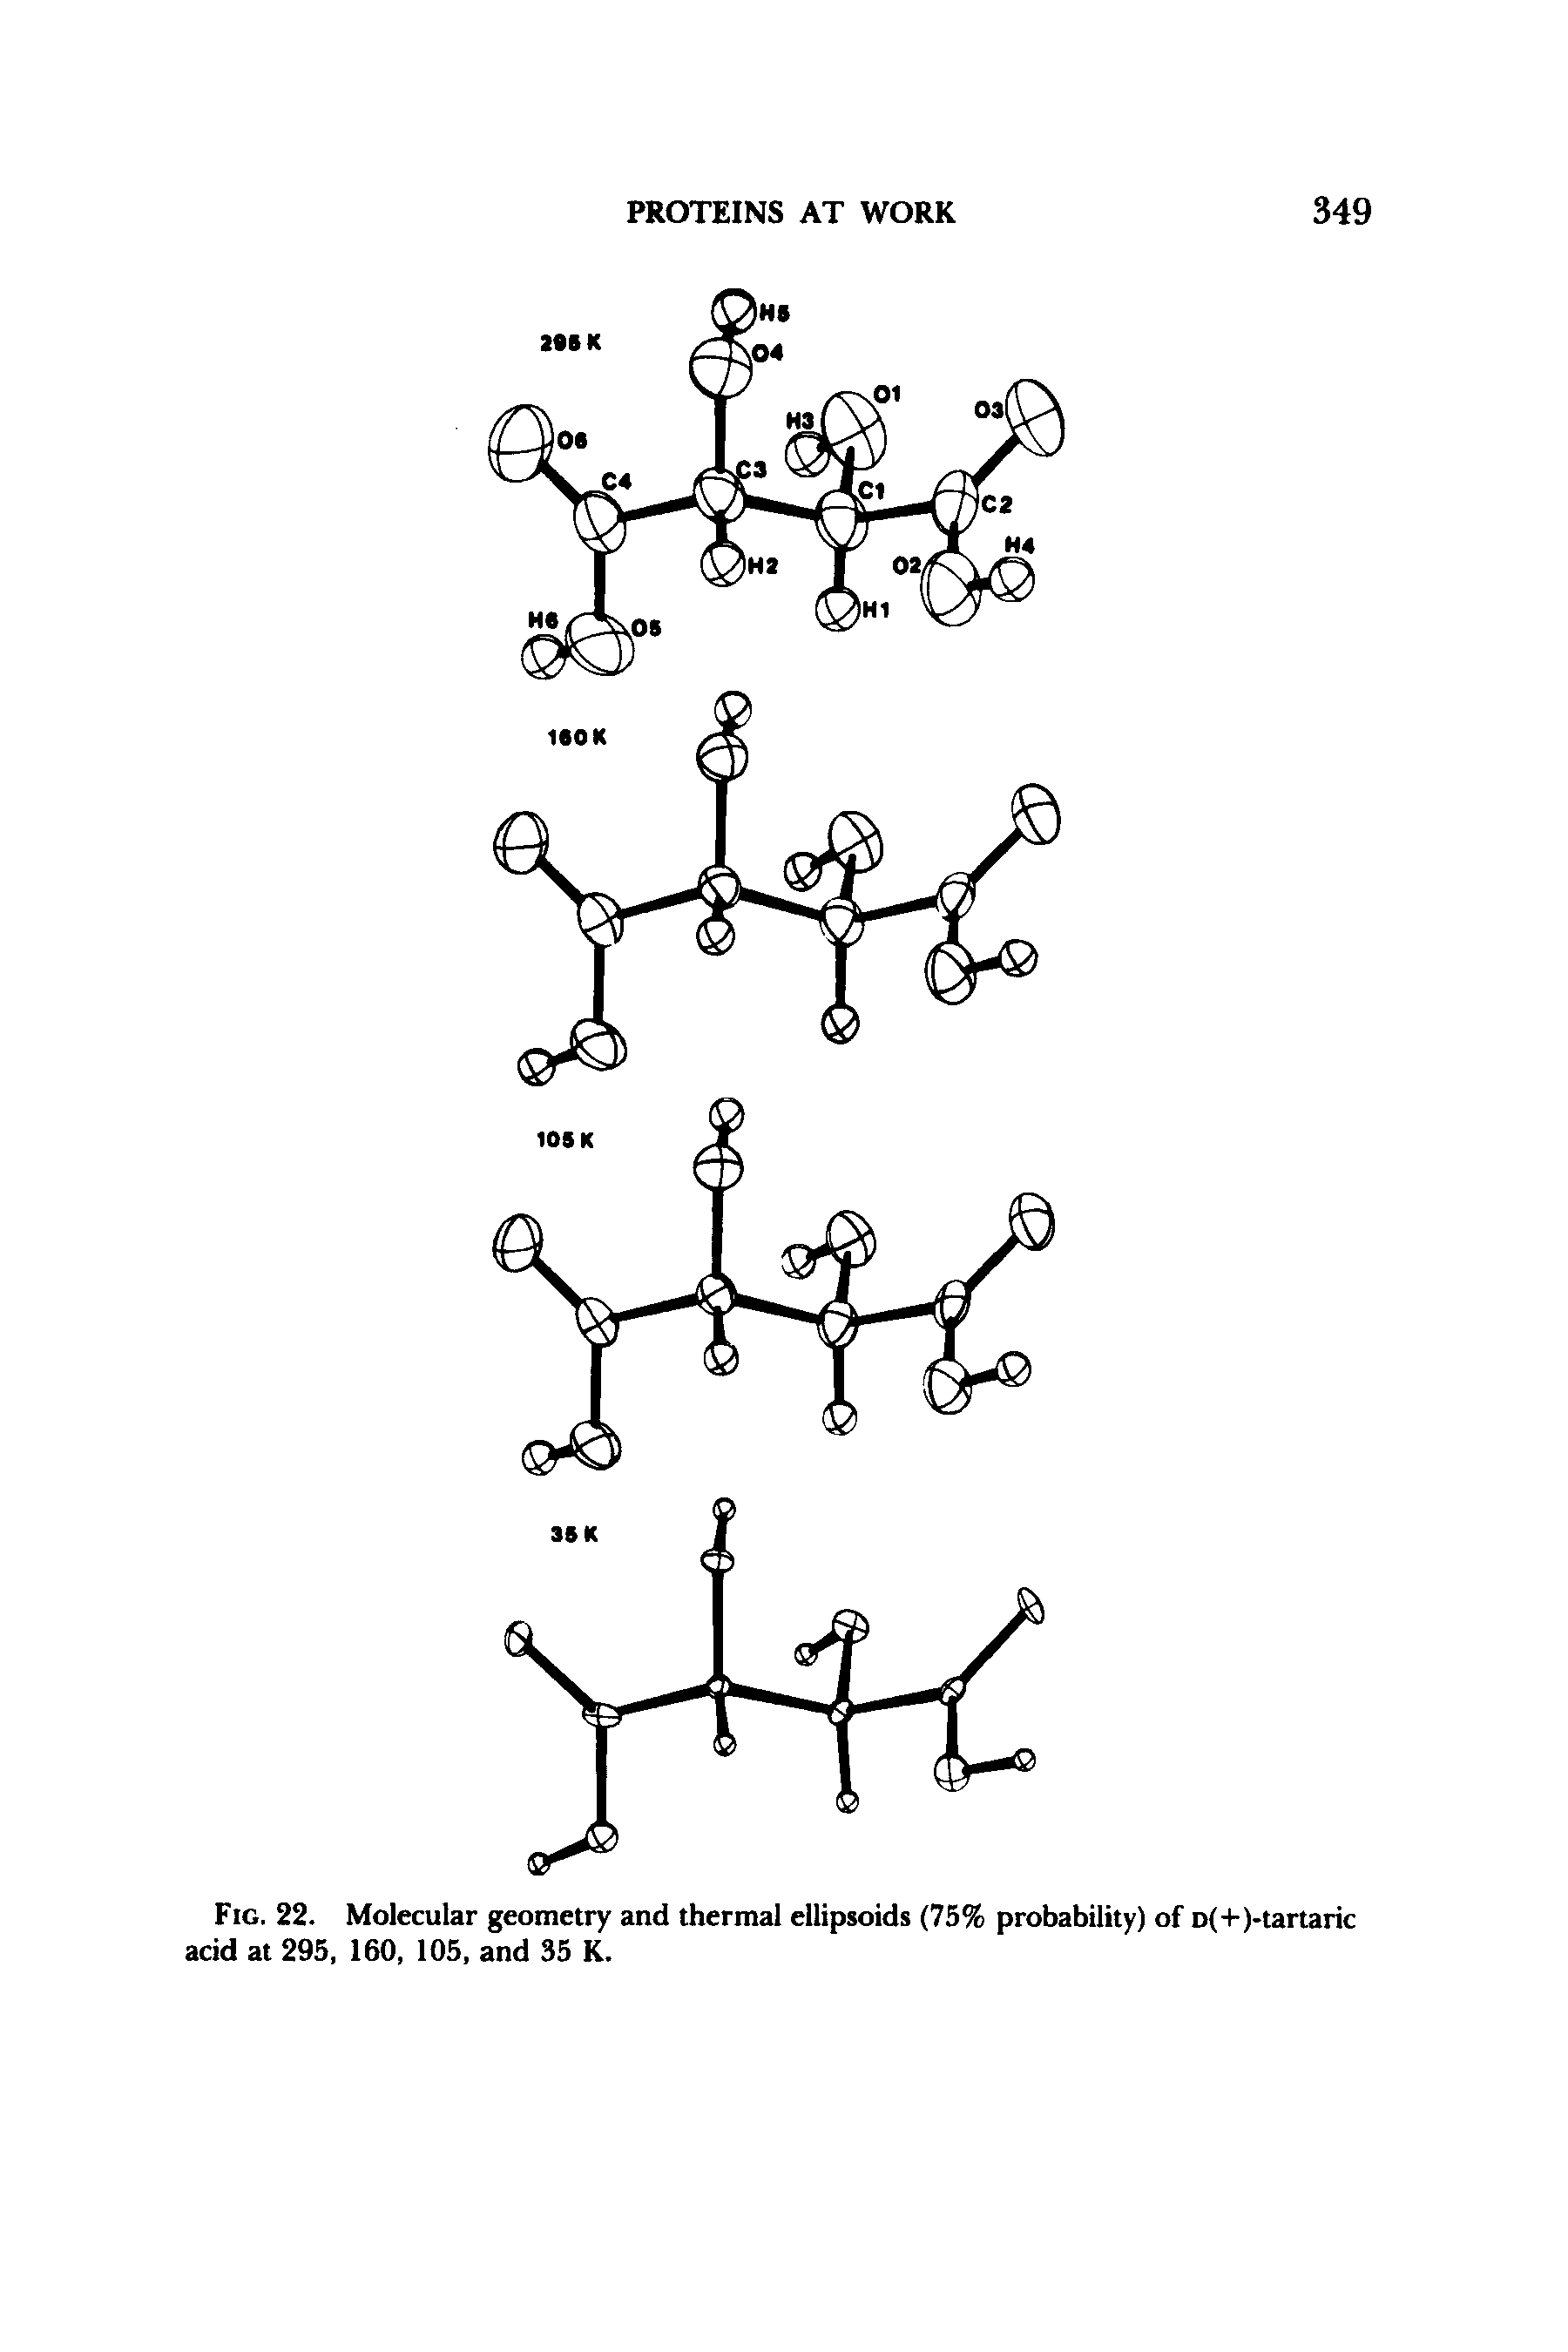 Fig. 22. Molecular geometry and thermal ellipsoids (75% probability) of D(+)-tartaric acid at 295, 160, 105, and 35 K.